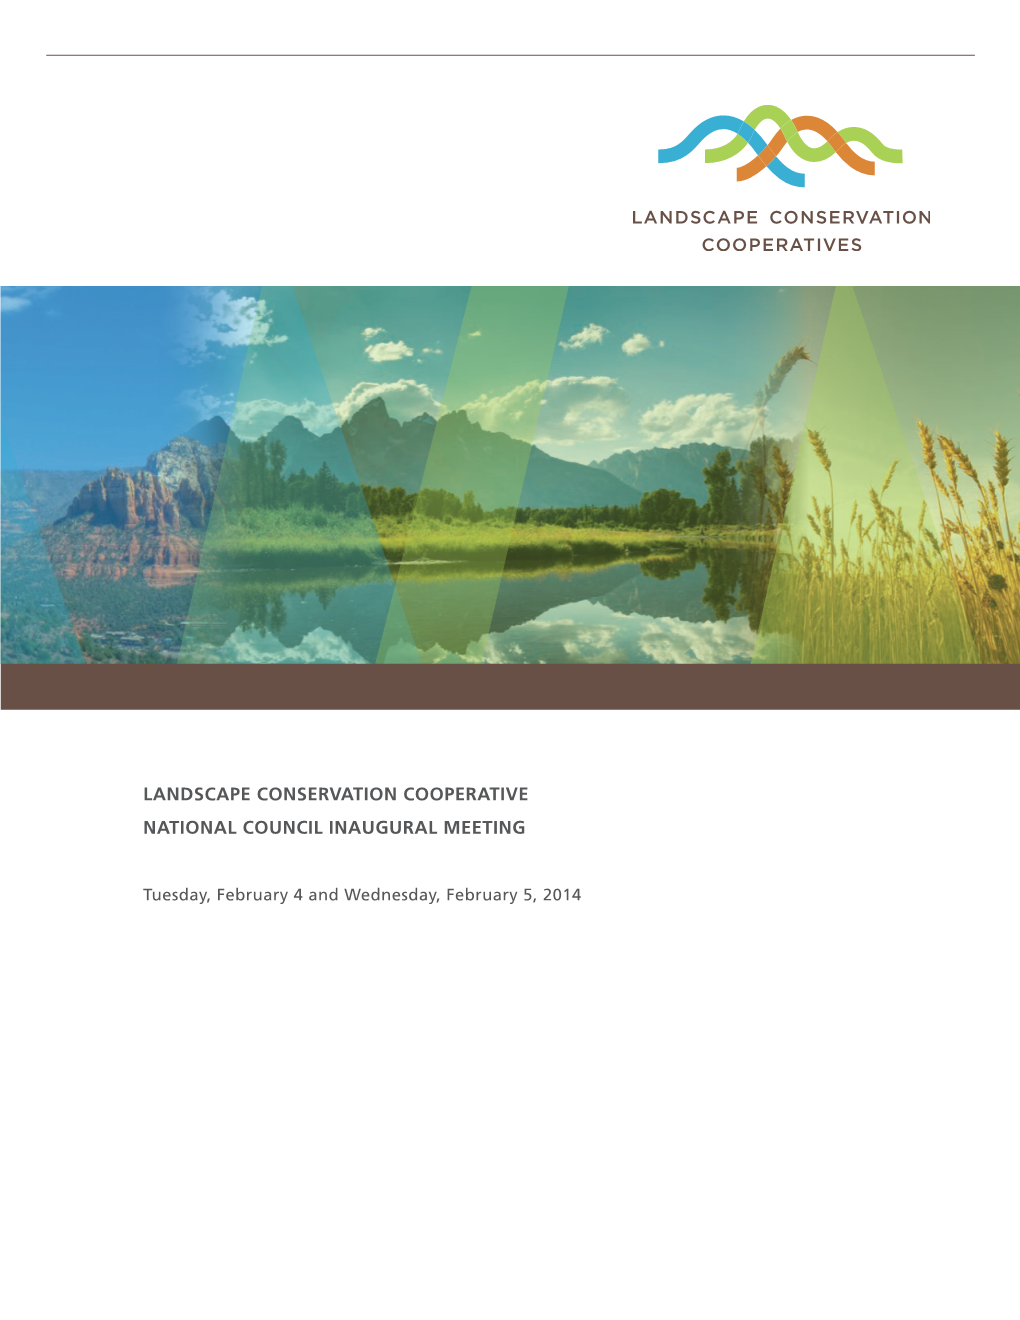 Landscape Conservation Cooperative National Council Inaugural Meeting